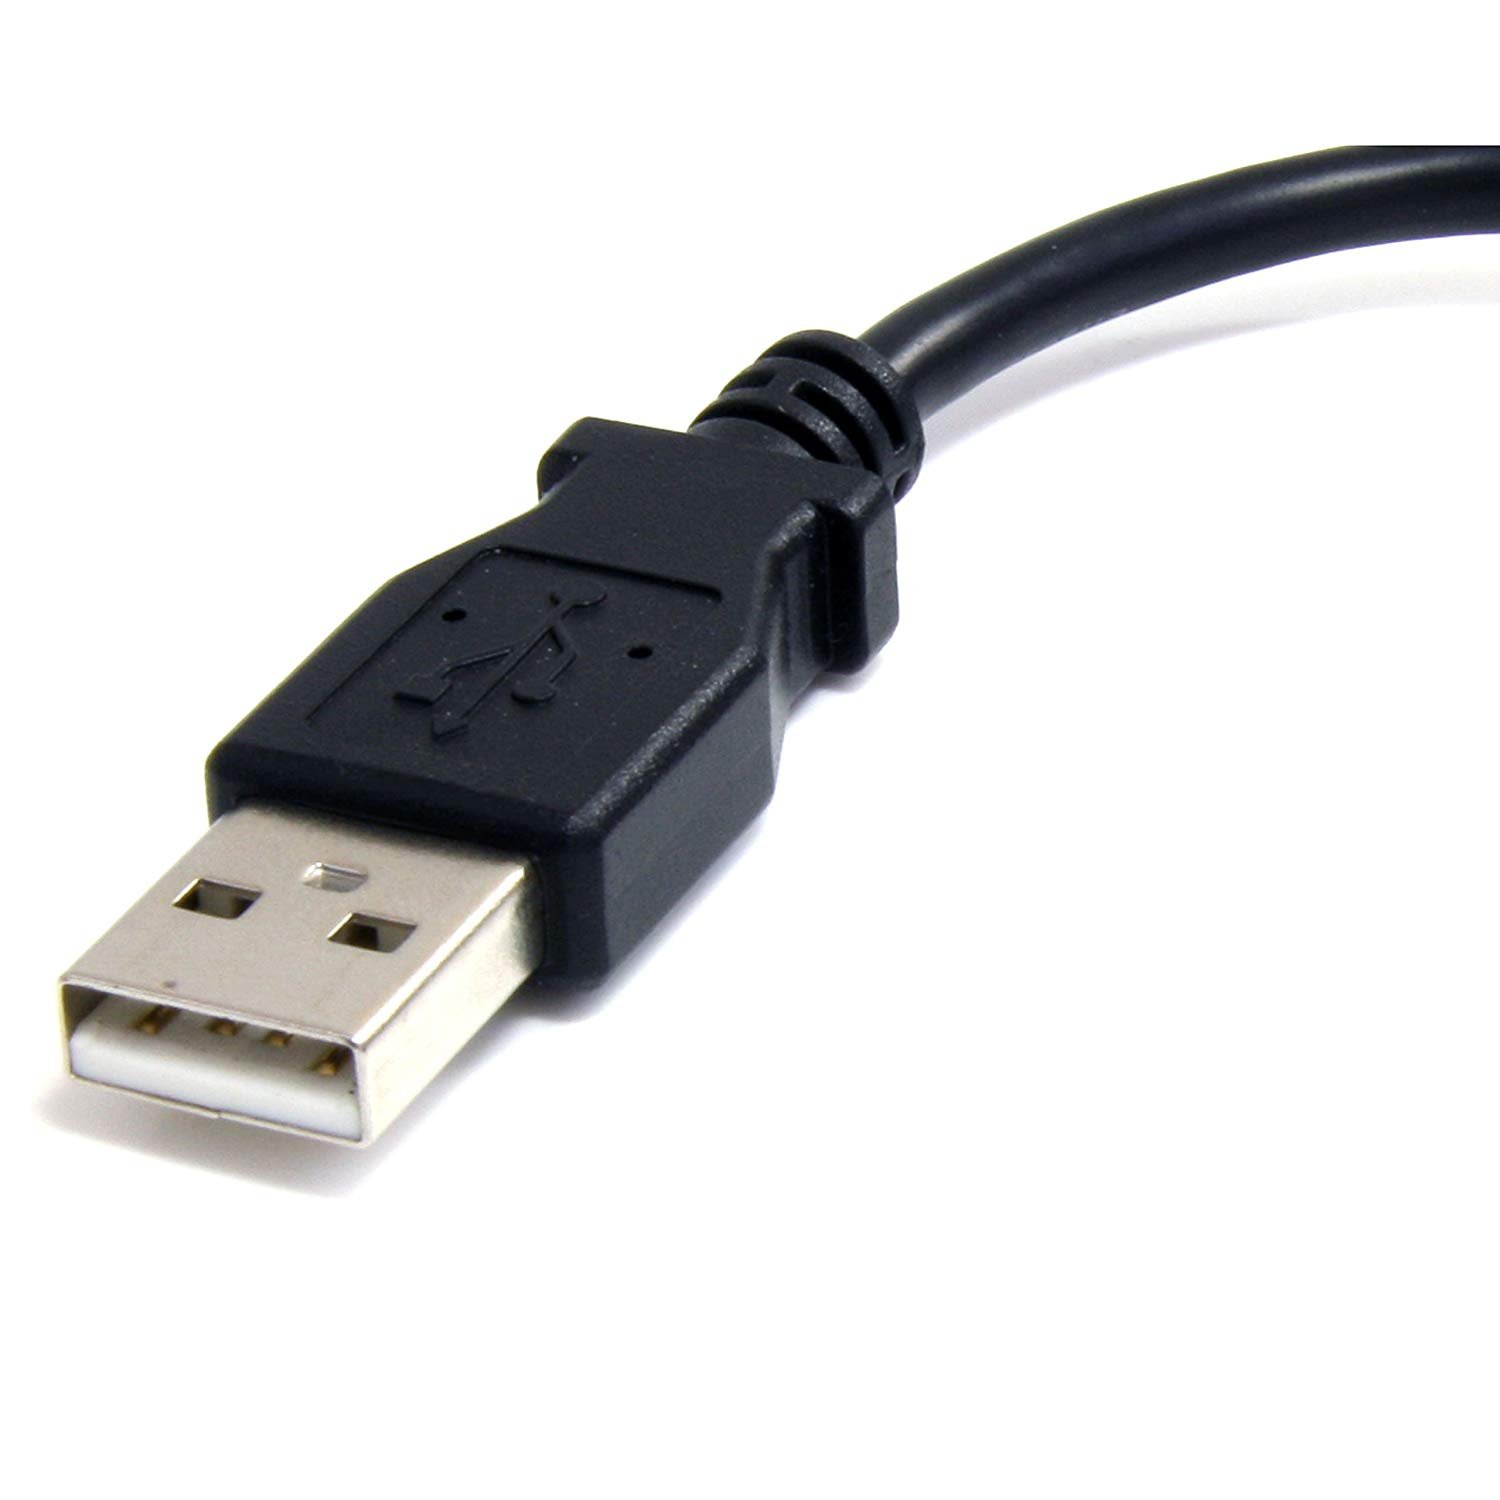 This 17 Cm Short Usb To Micro-Usb Power Line Cable With Good Silicon Insulating Material And High-Quality Connector Can Be Used To Charge Or Sync Micro Usb Mobile Devices